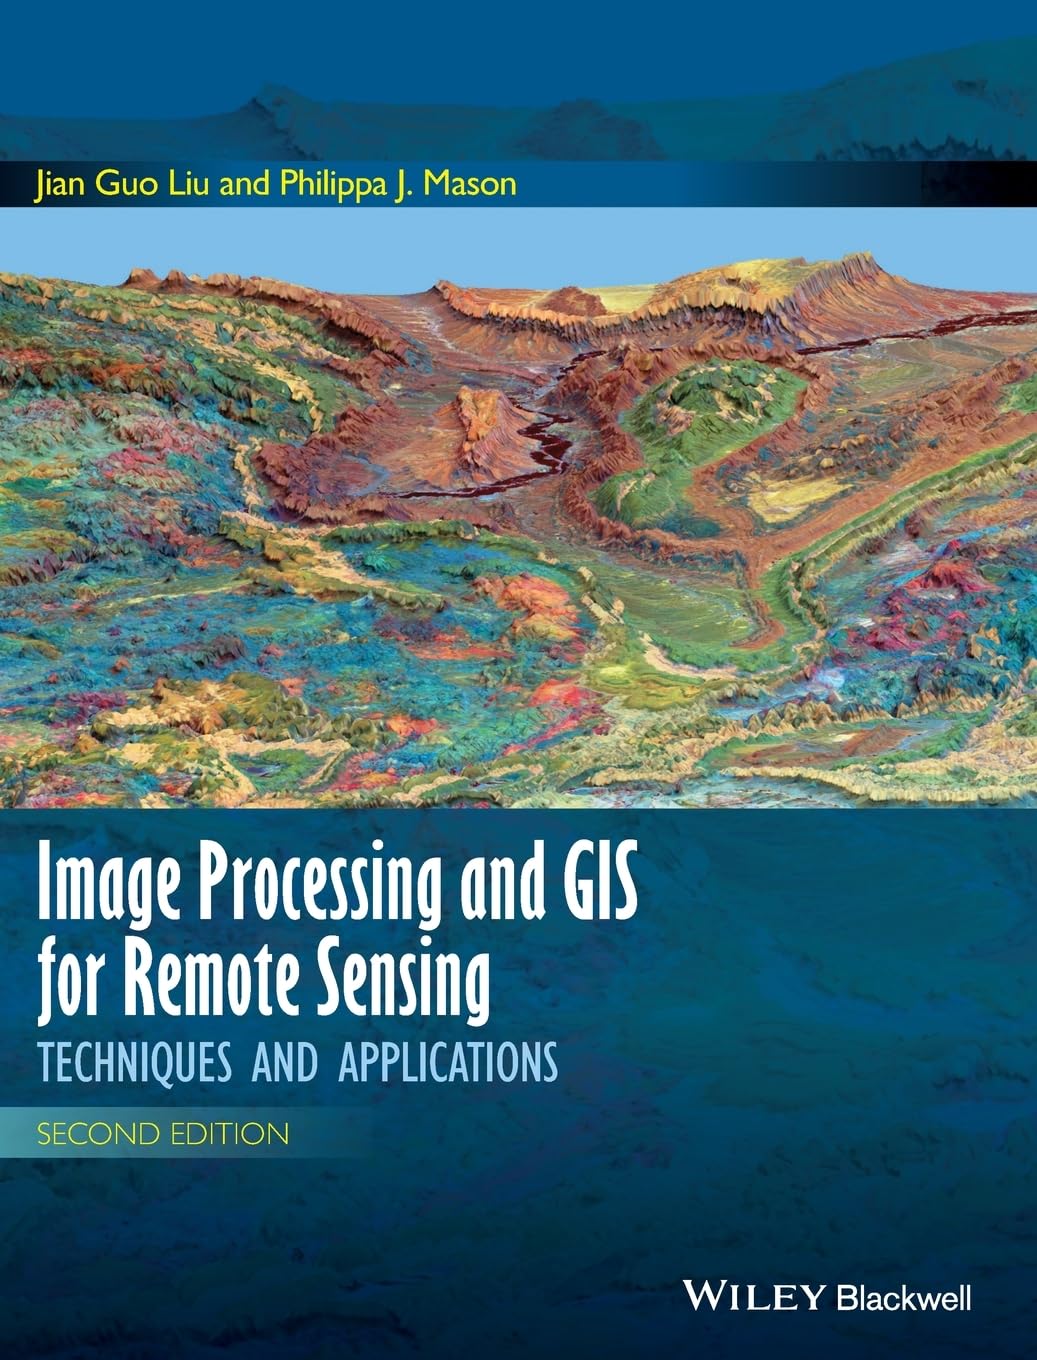 Image processing and GIS for remote sensing techniques and applications